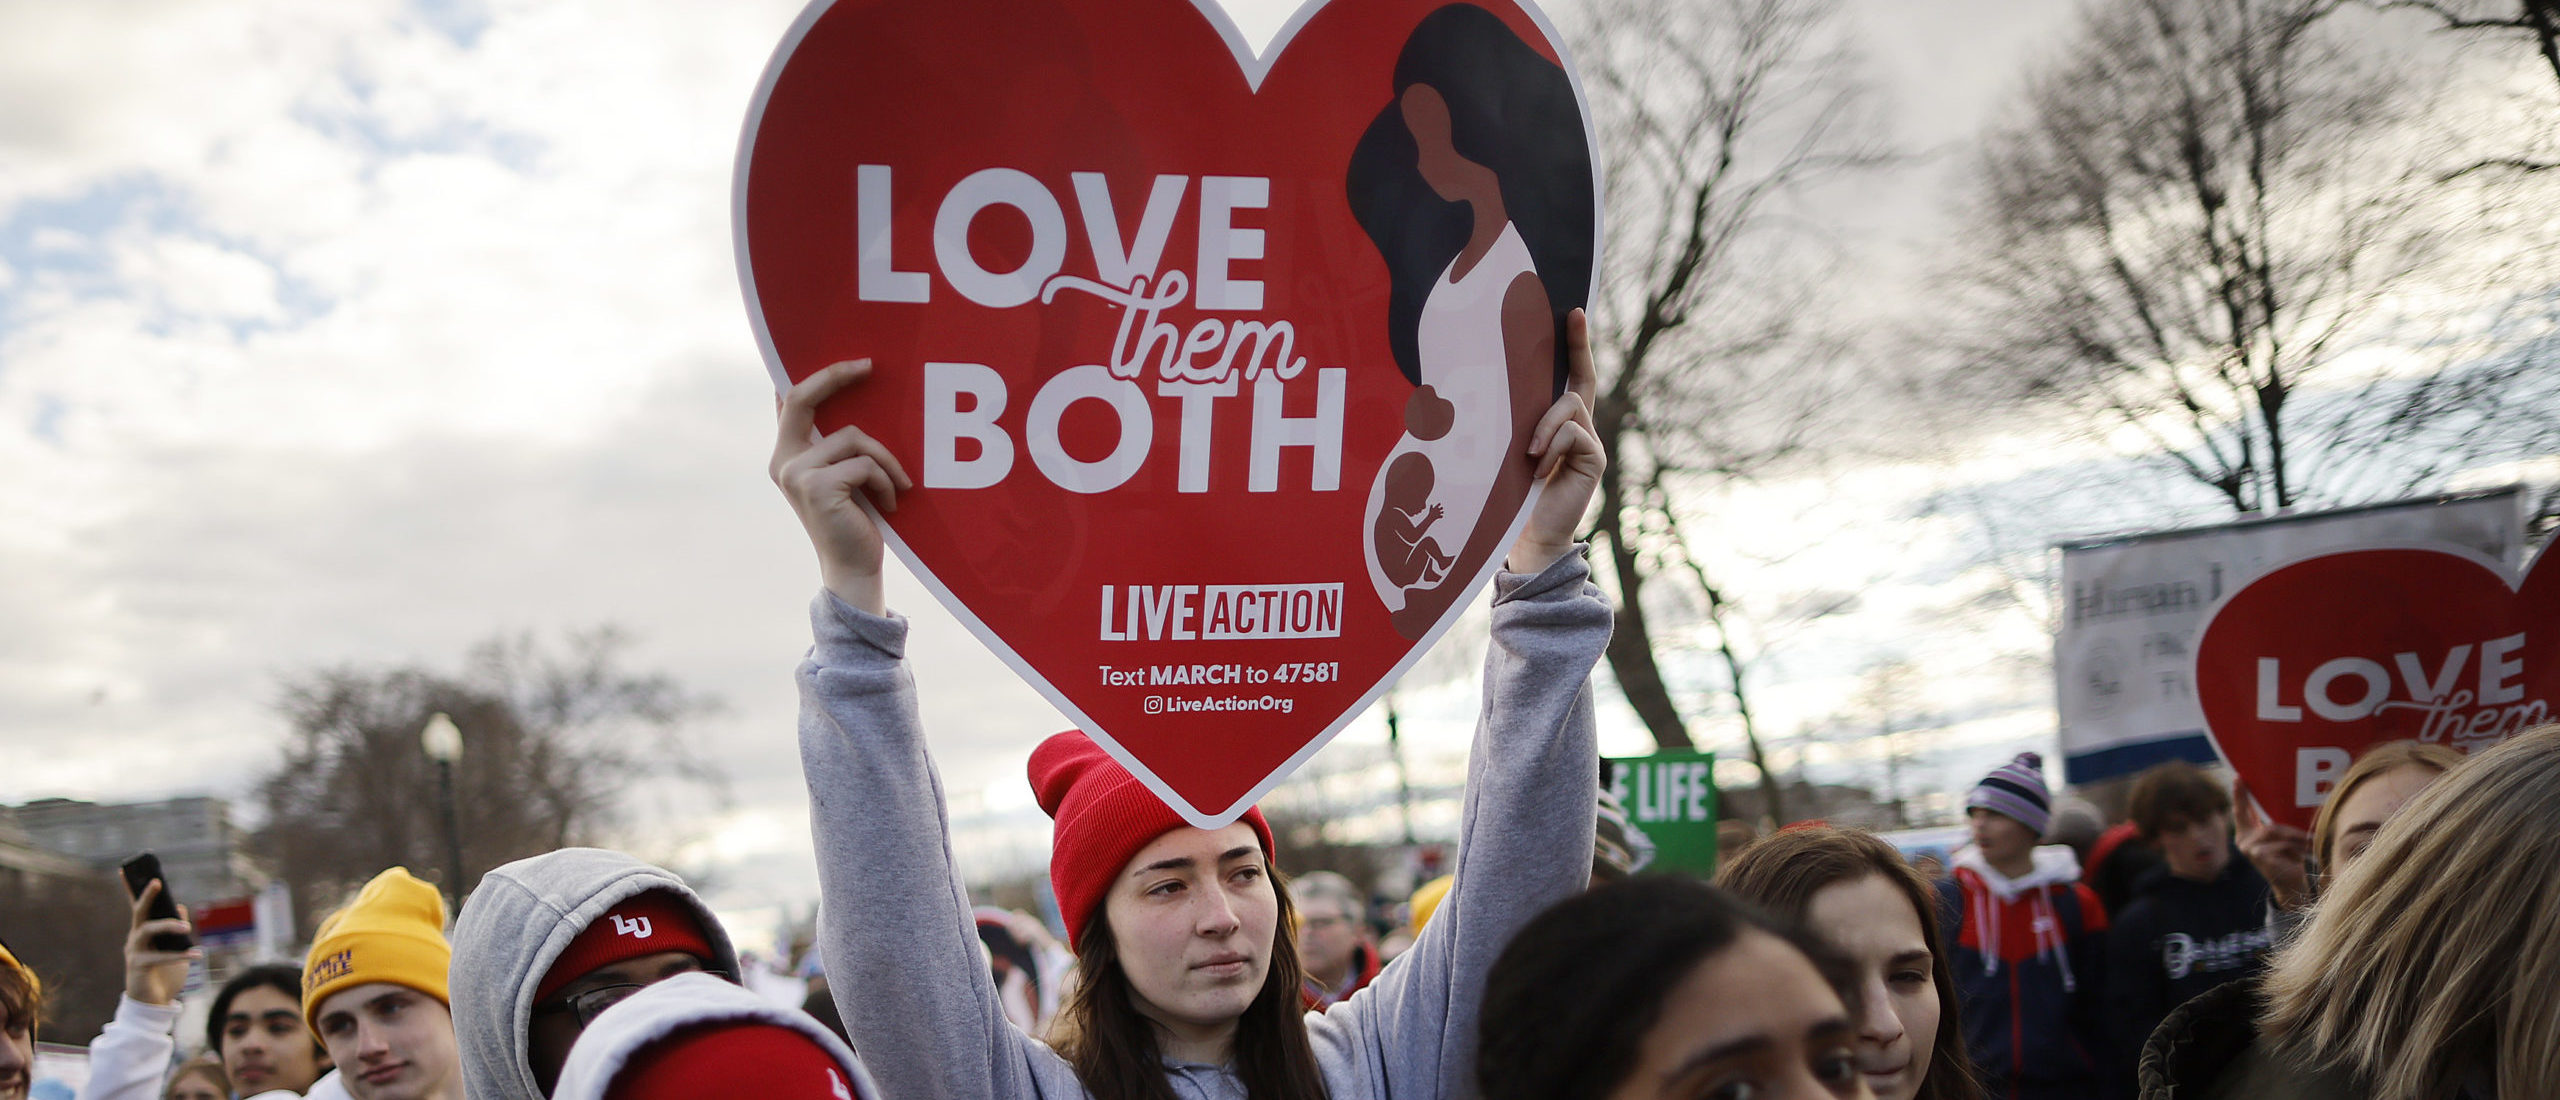 WASHINGTON, DC - JANUARY 20: People march past the U.S. Supreme Court during the 50th annual March for Life rally on January 20, 2023 in Washington, DC. Anti-abortion activists attended the annual march to mark the first to occur in a “post-Roe nation” since the Supreme Court's Dobbs vs Jackson Women's Health ruling which overturned 50 years of federal protections for abortion healthcare. (Photo by Chip Somodevilla/Getty Images)